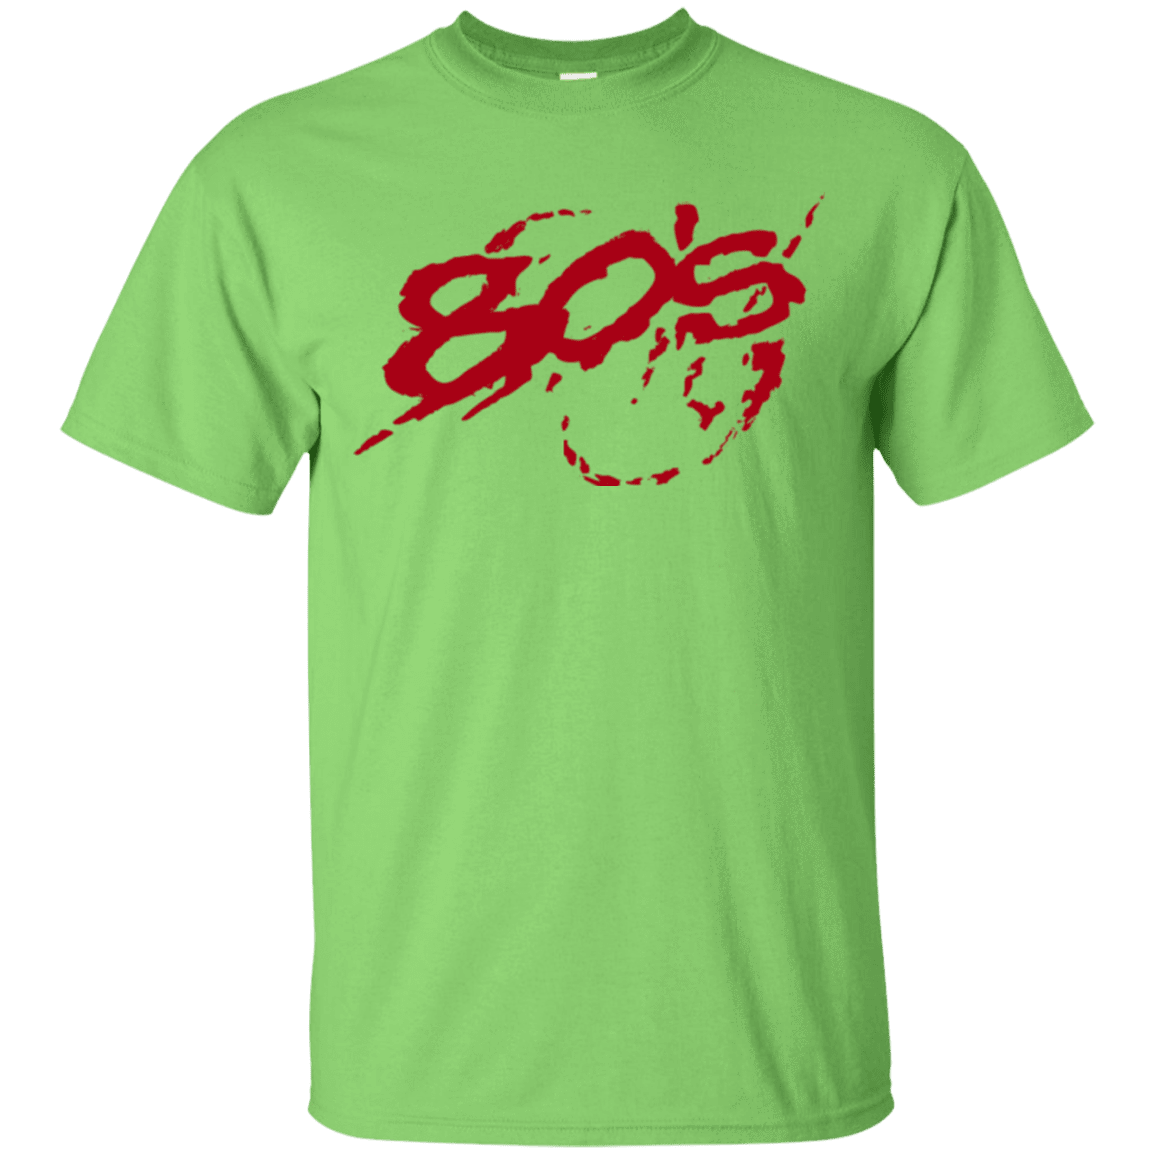 T-Shirts Lime / Small 80s 300 T-Shirt